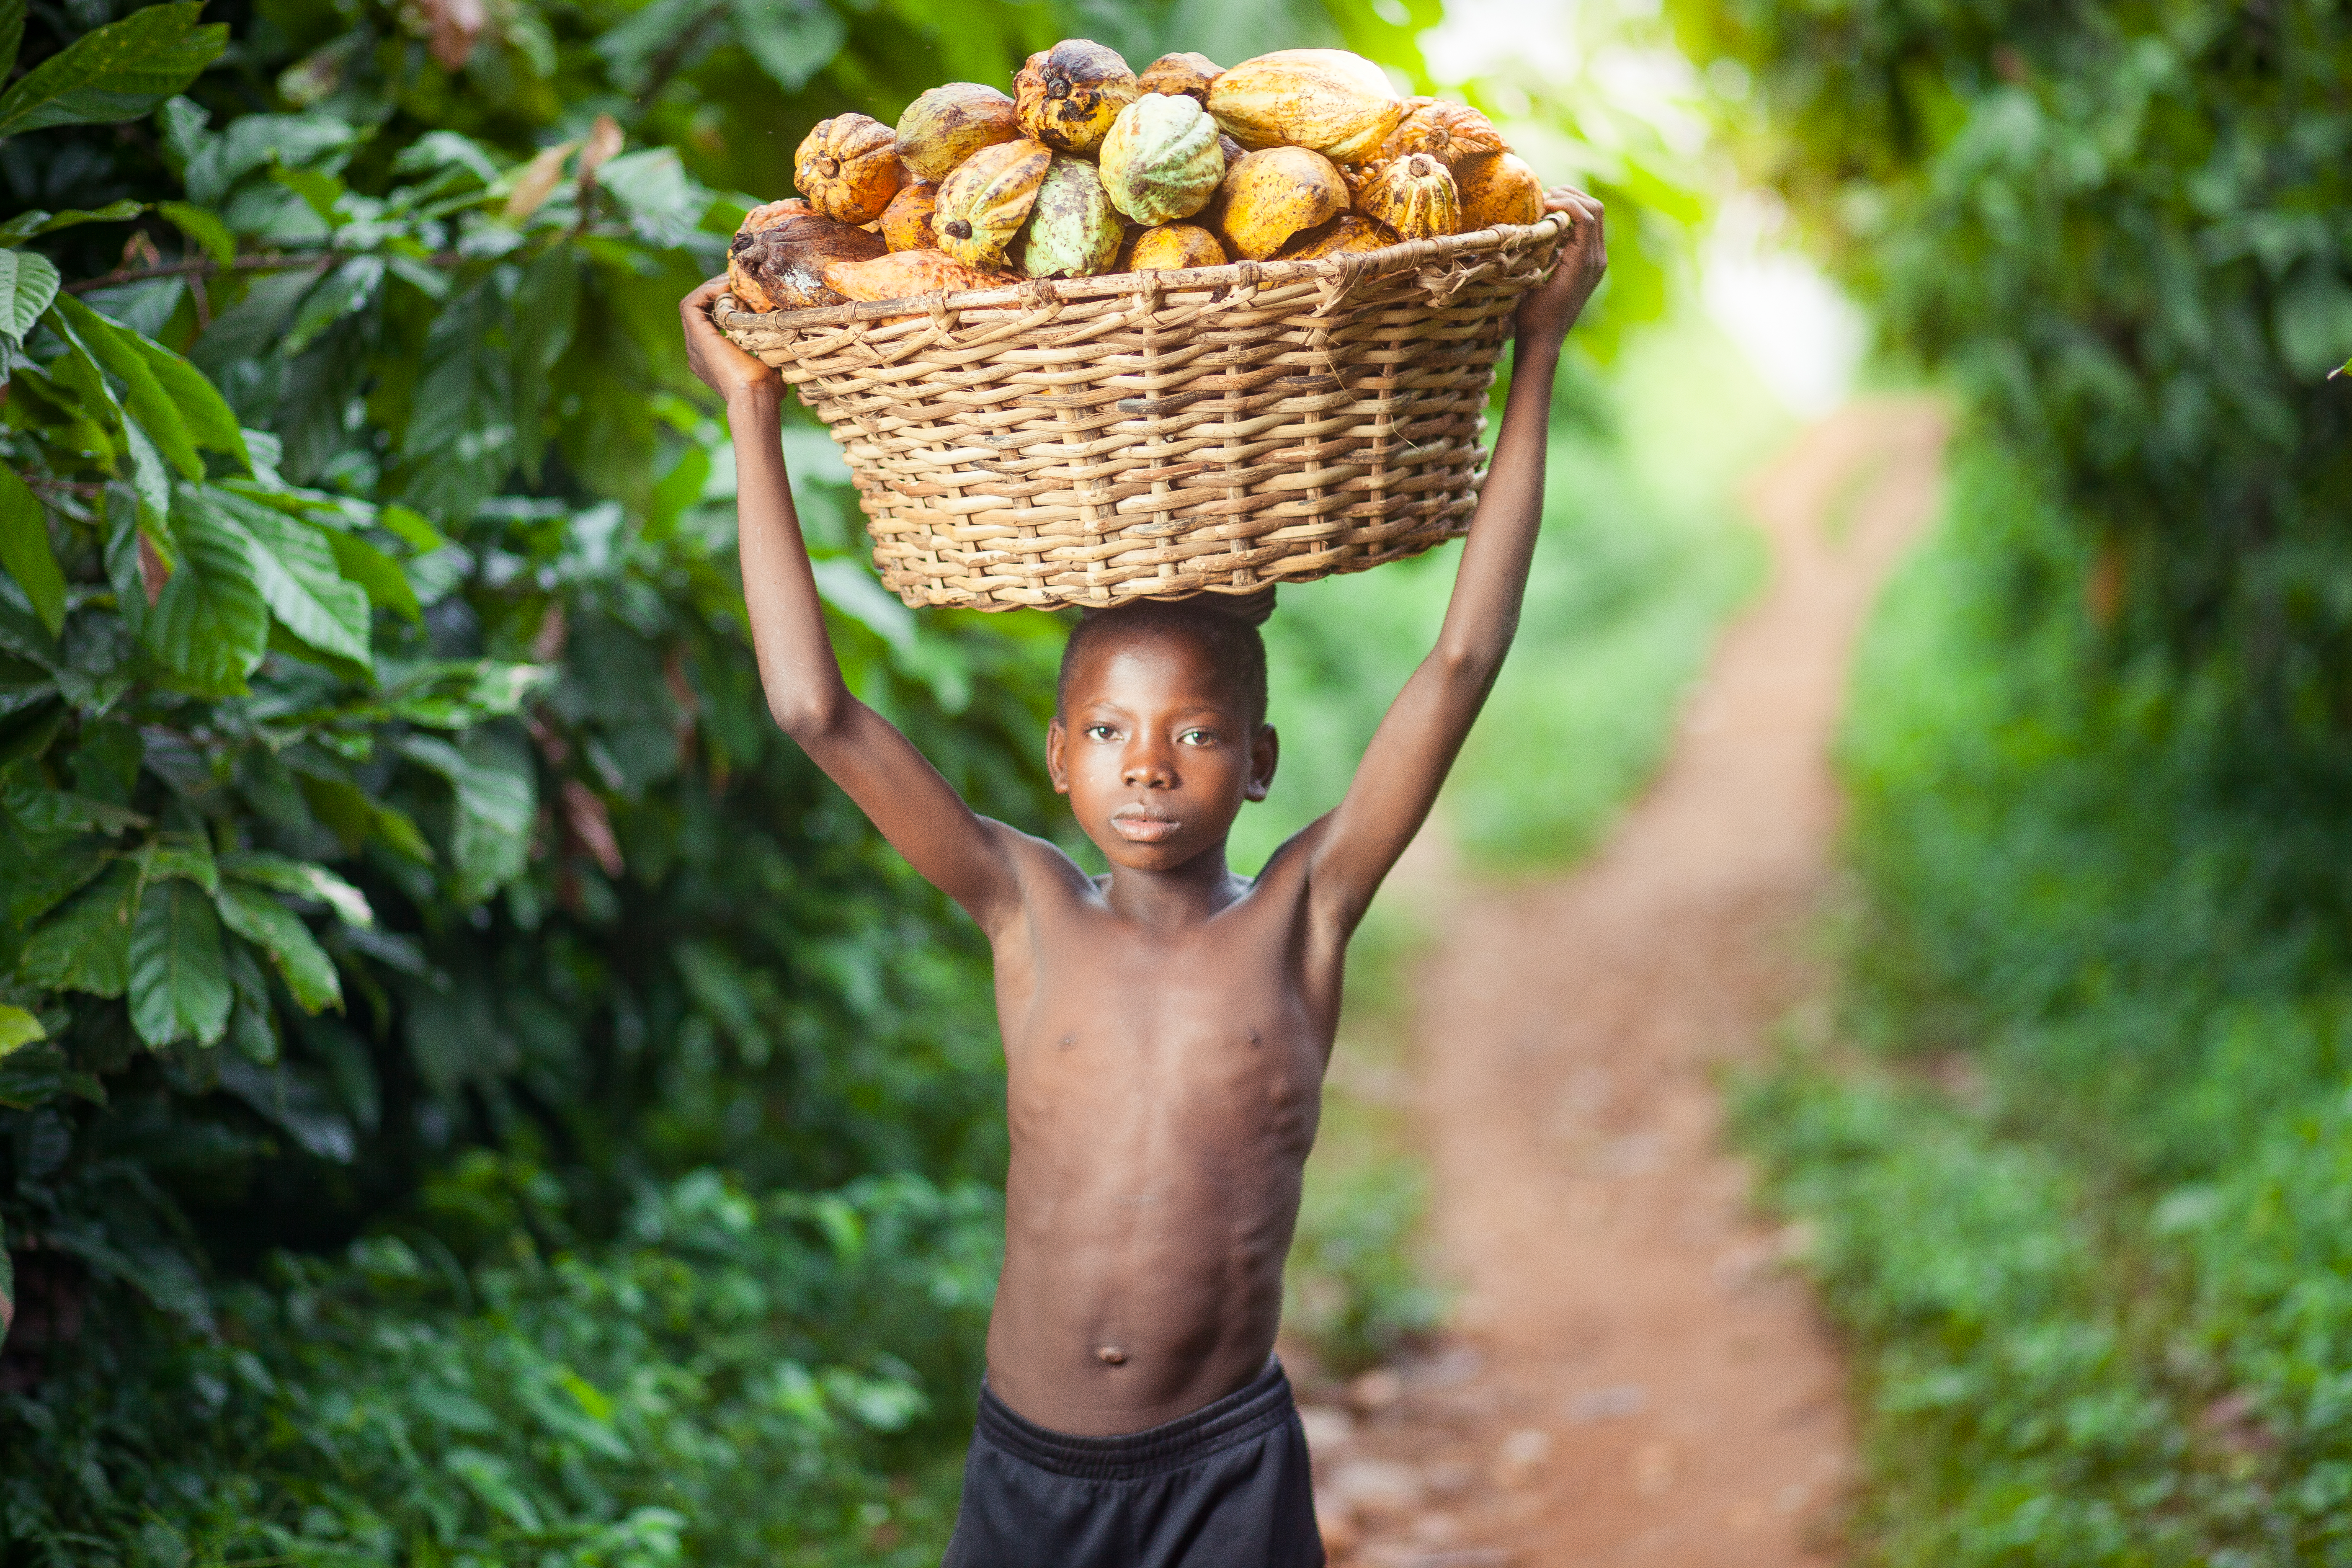 Child carrying basket of cocoa by By Charles William Adofo